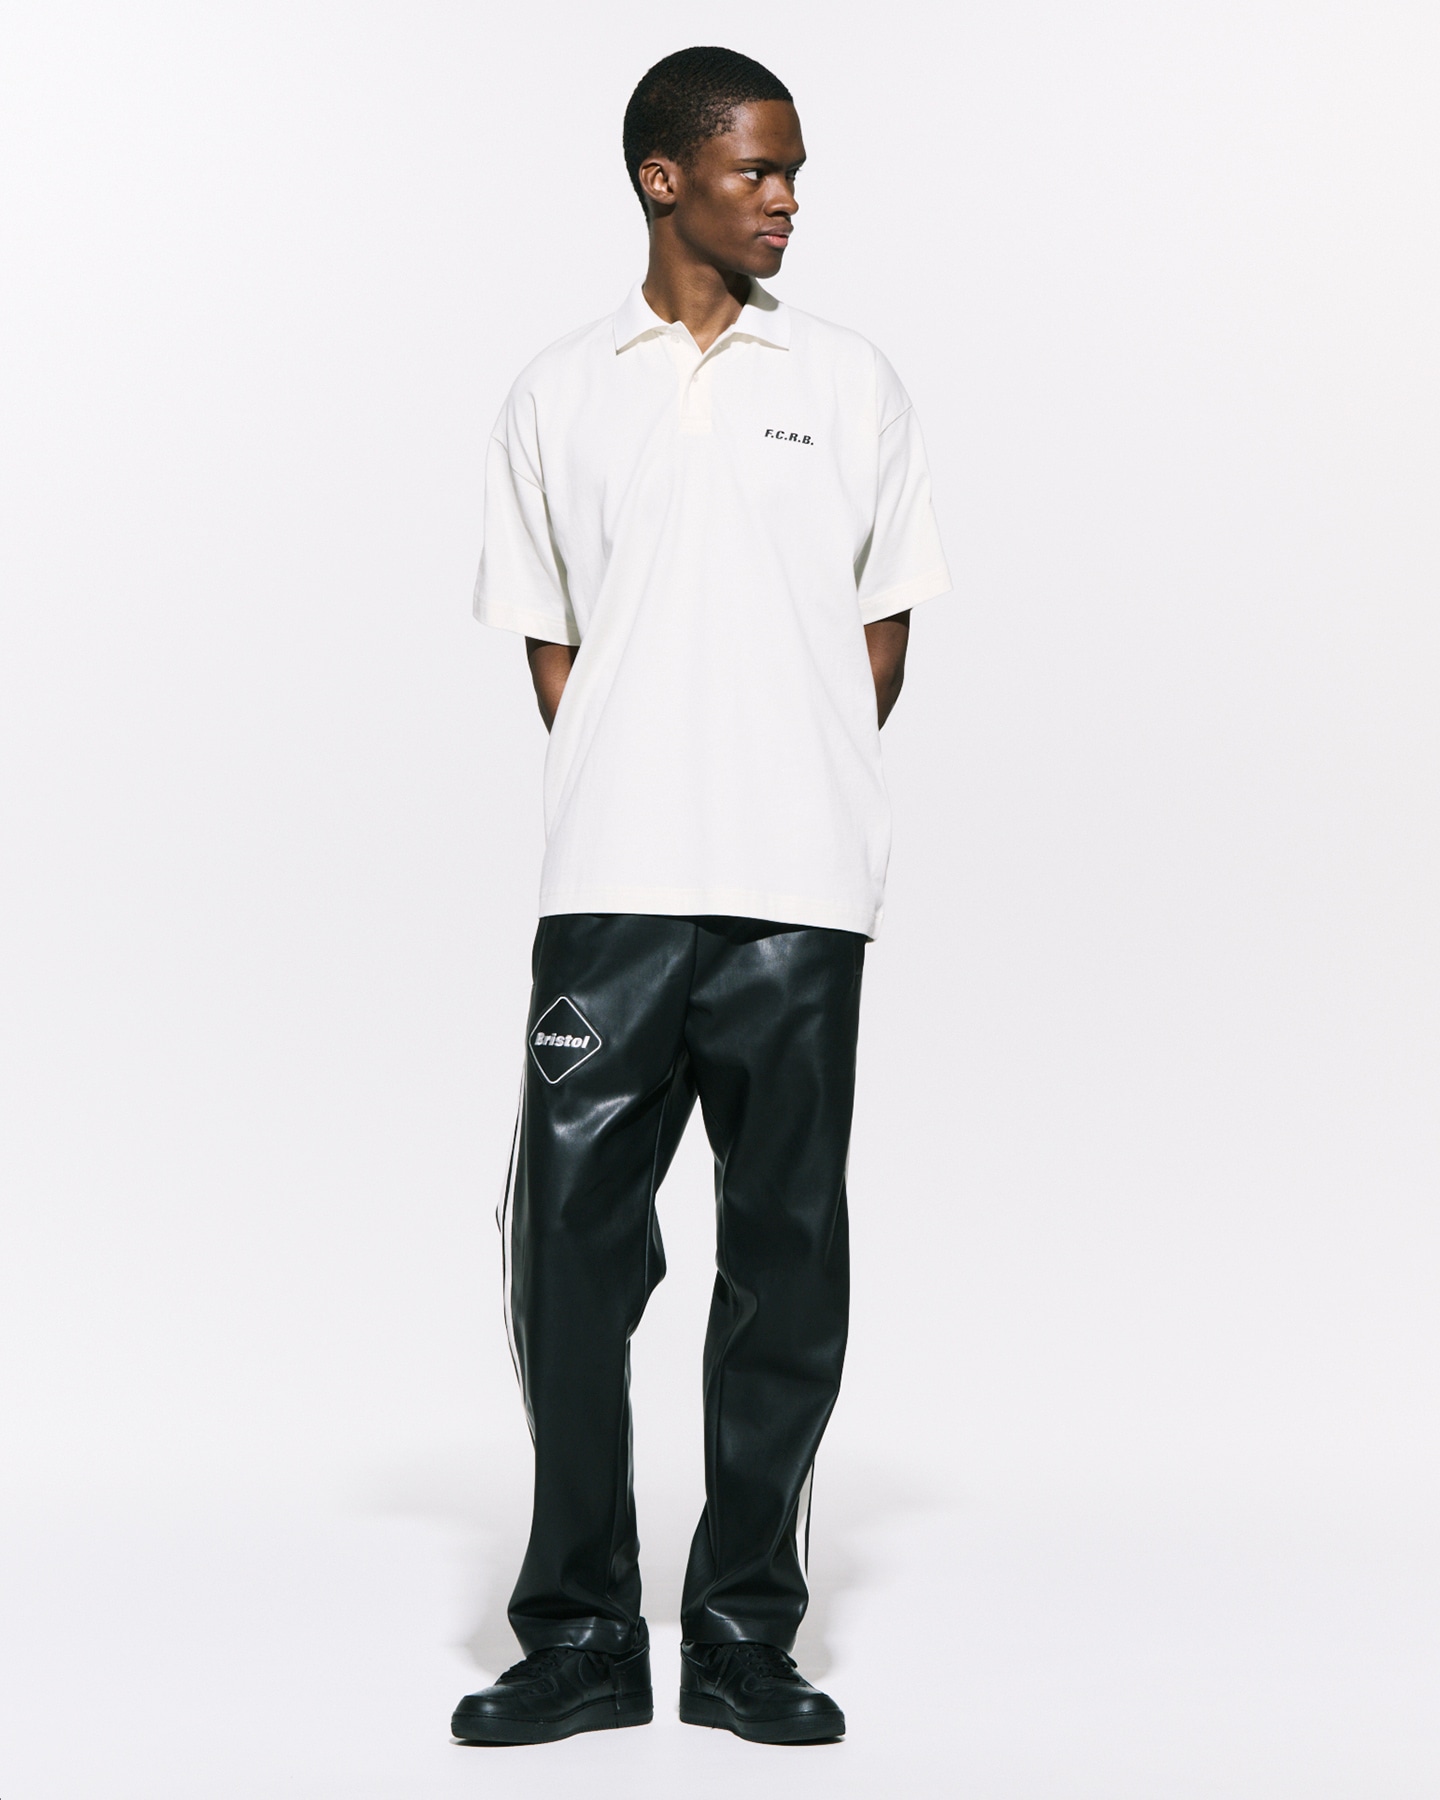 SOPH. | SYNTHETIC LEATHER PANTS(XL BLACK):